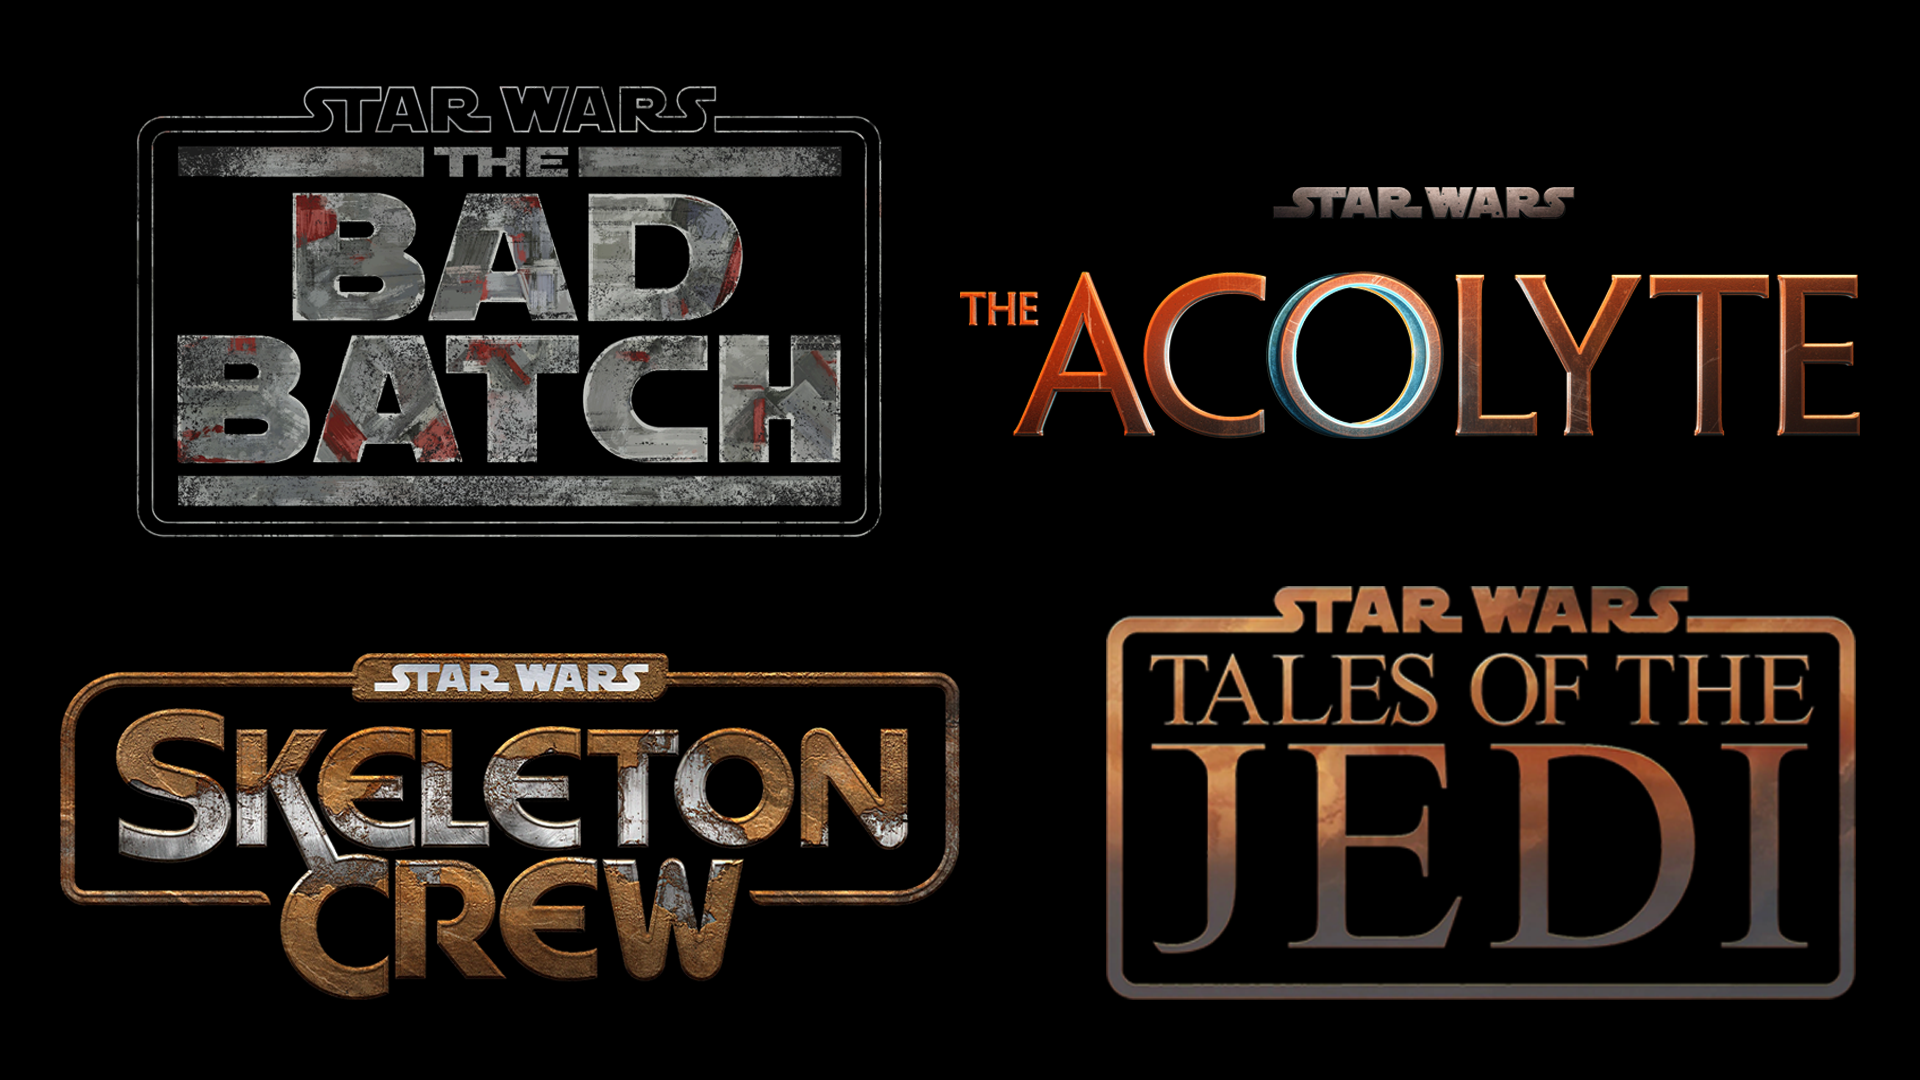 How 'Andor' Is Reviewing Compared To Other Disney Plus 'Star Wars